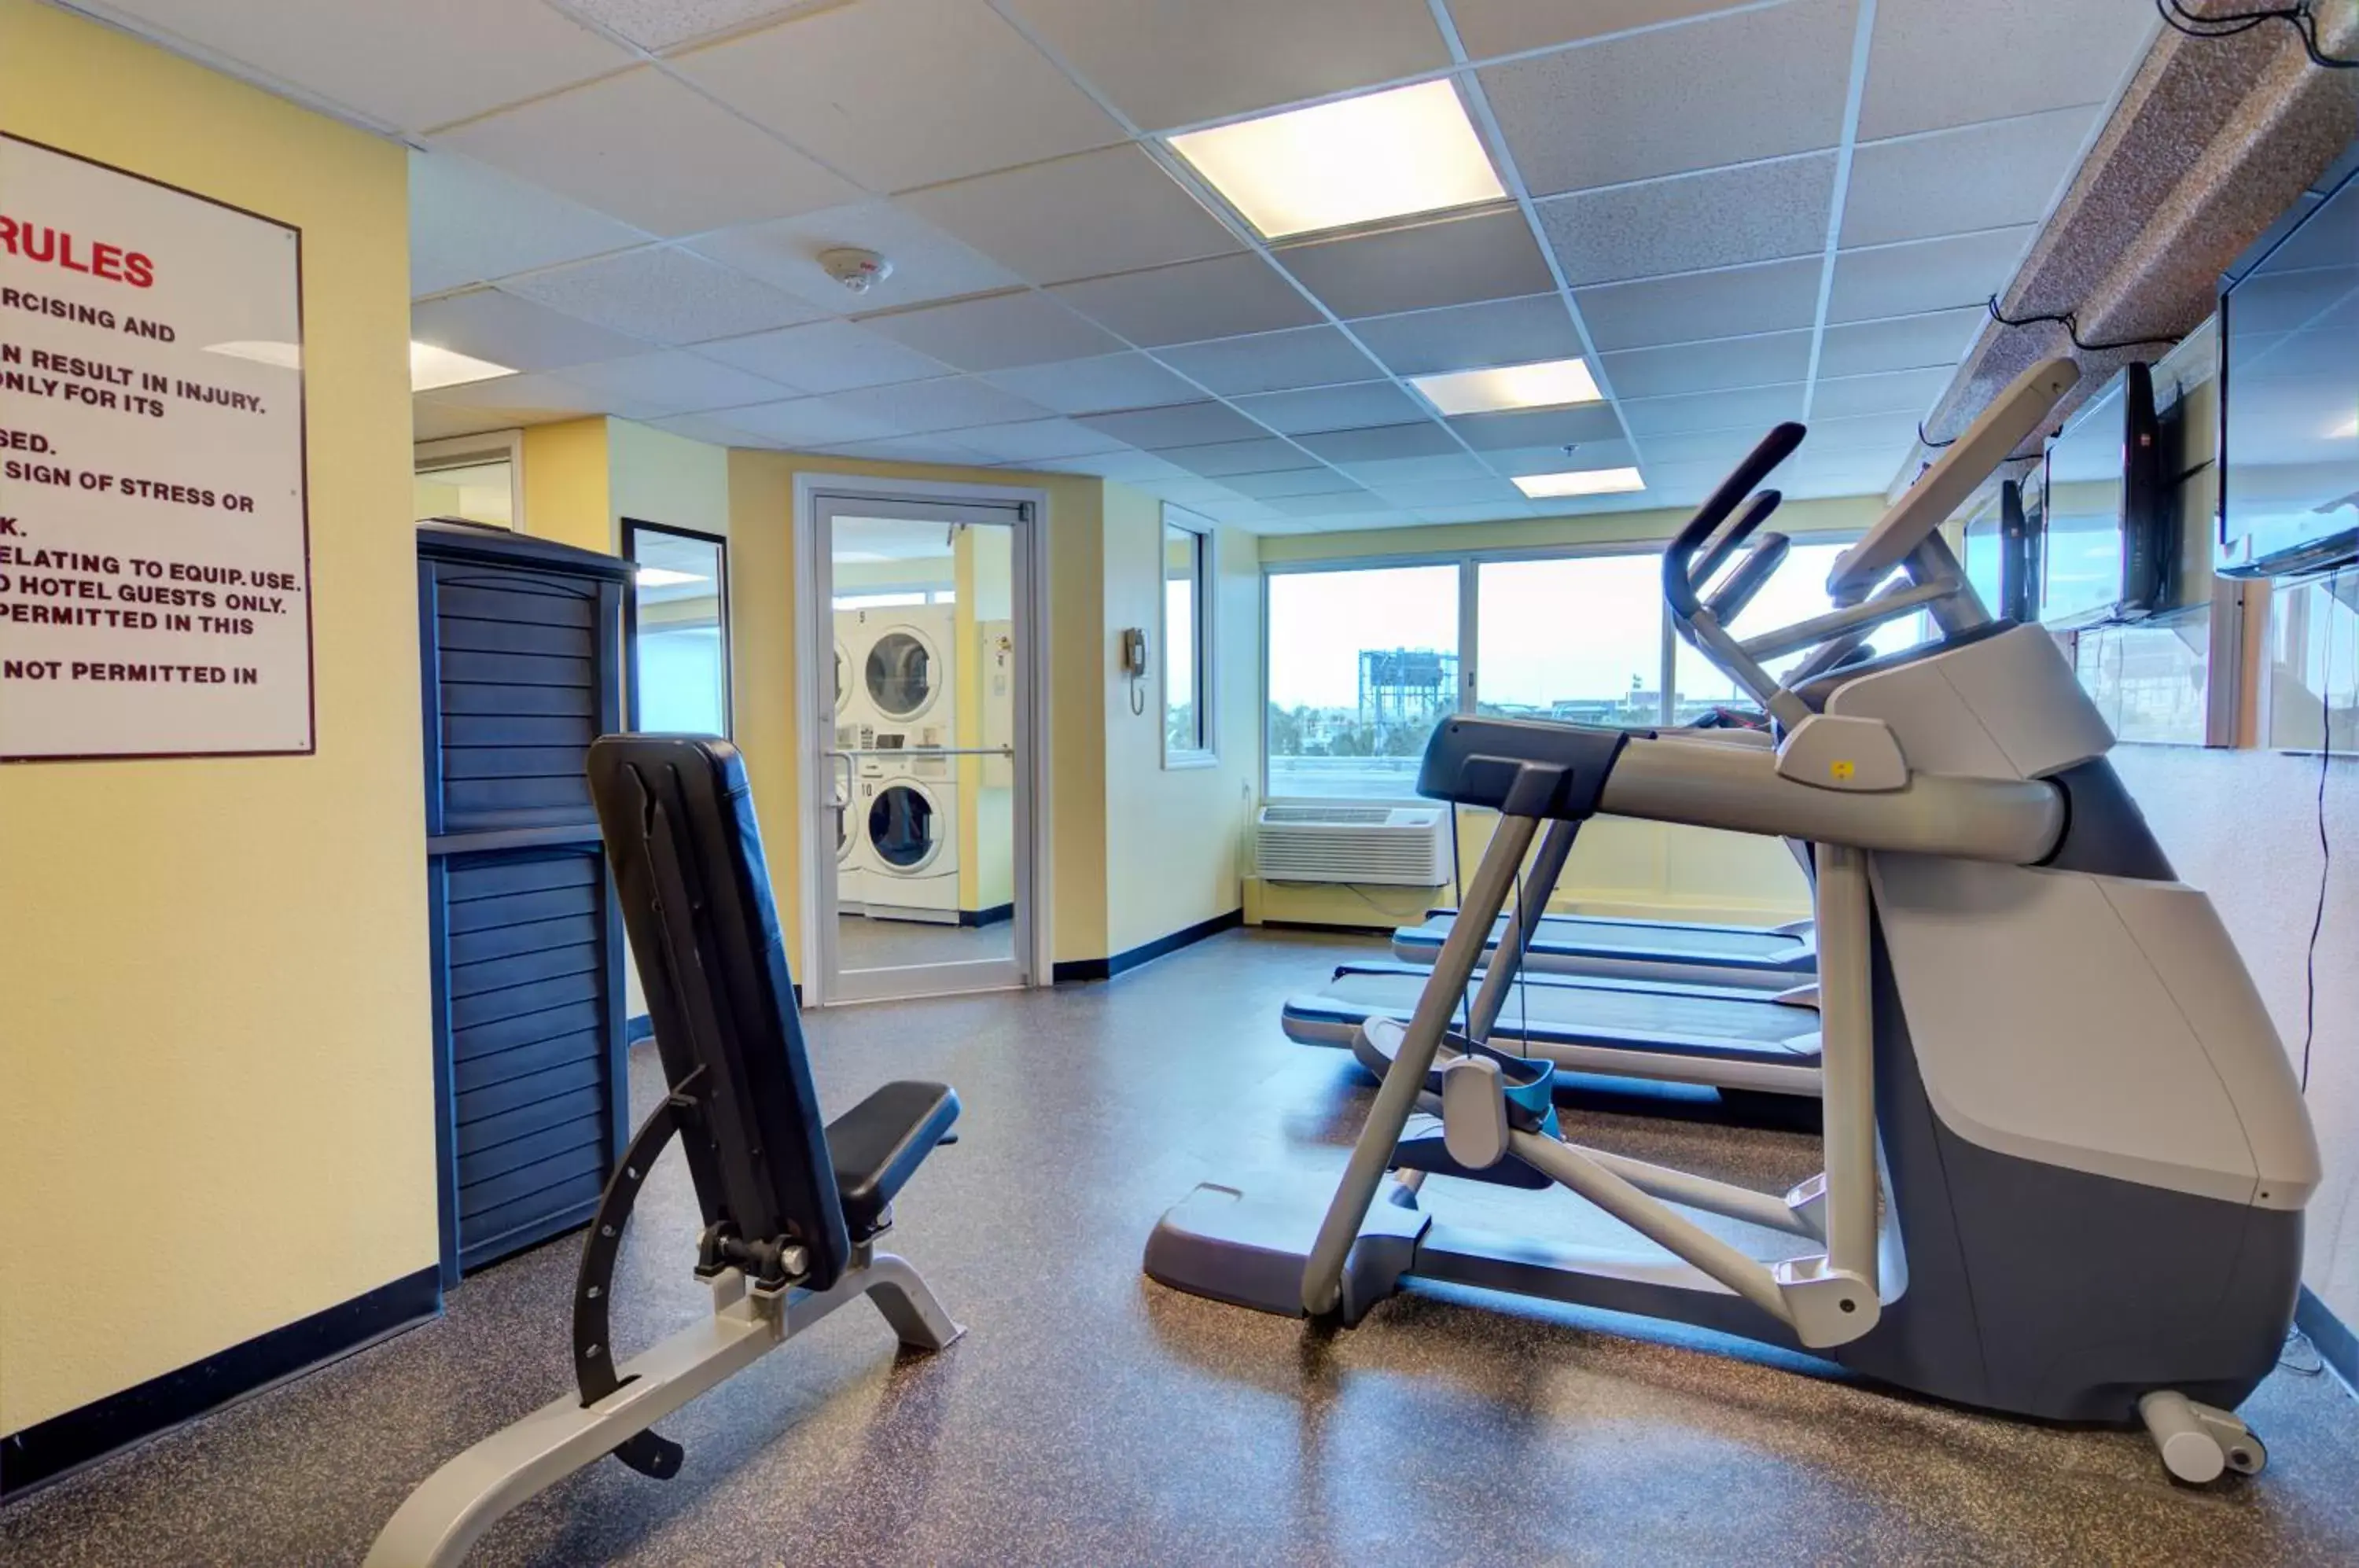 Fitness centre/facilities, Fitness Center/Facilities in The Barrymore Hotel Tampa Riverwalk